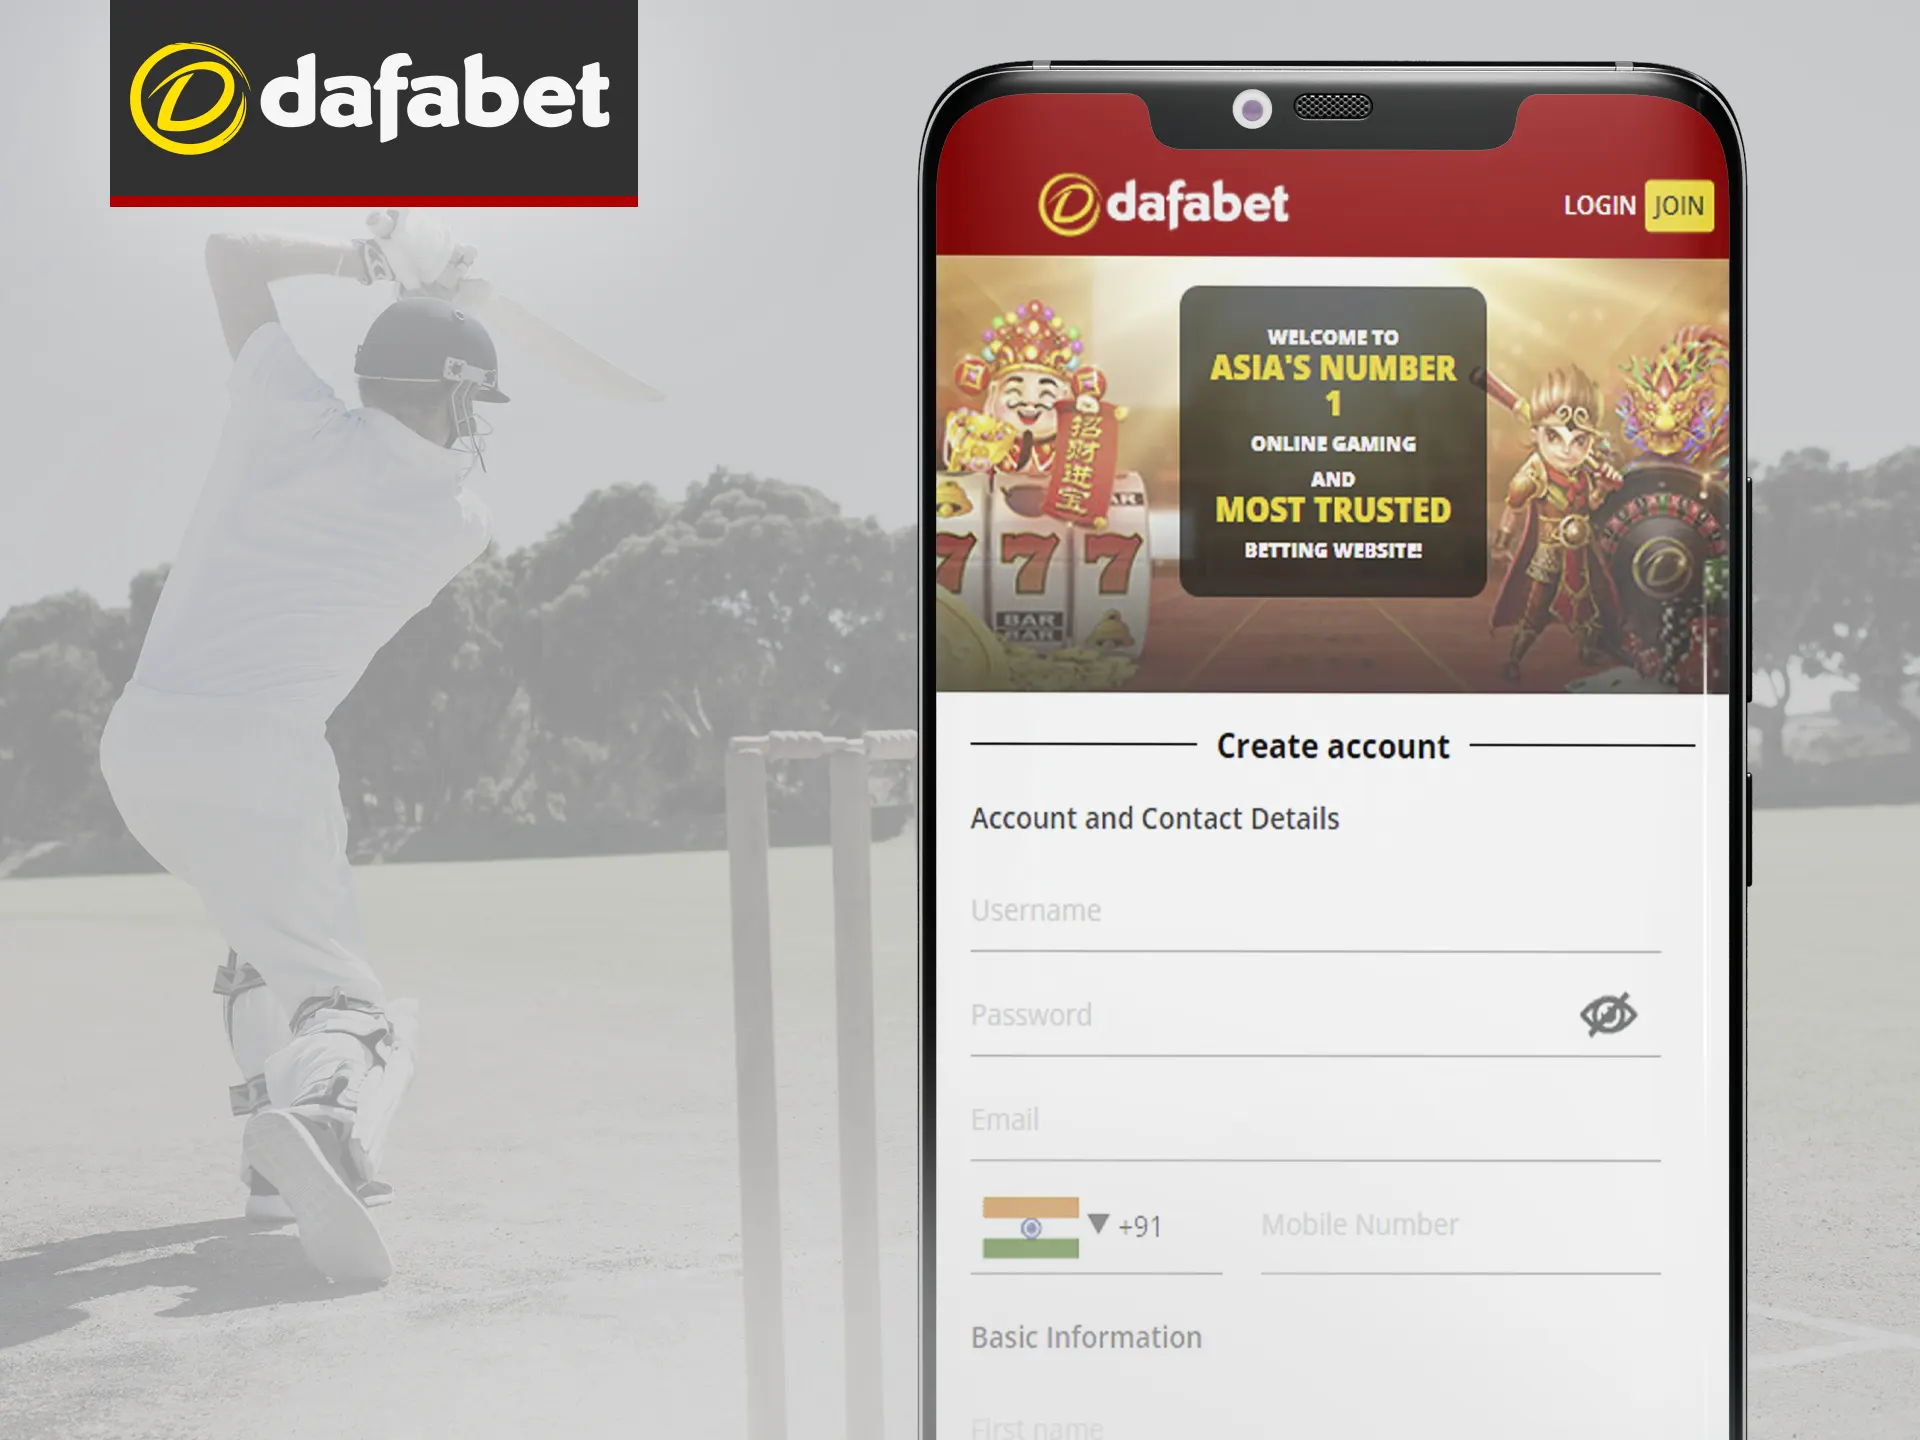 Check the steps how to register at Dafabet.